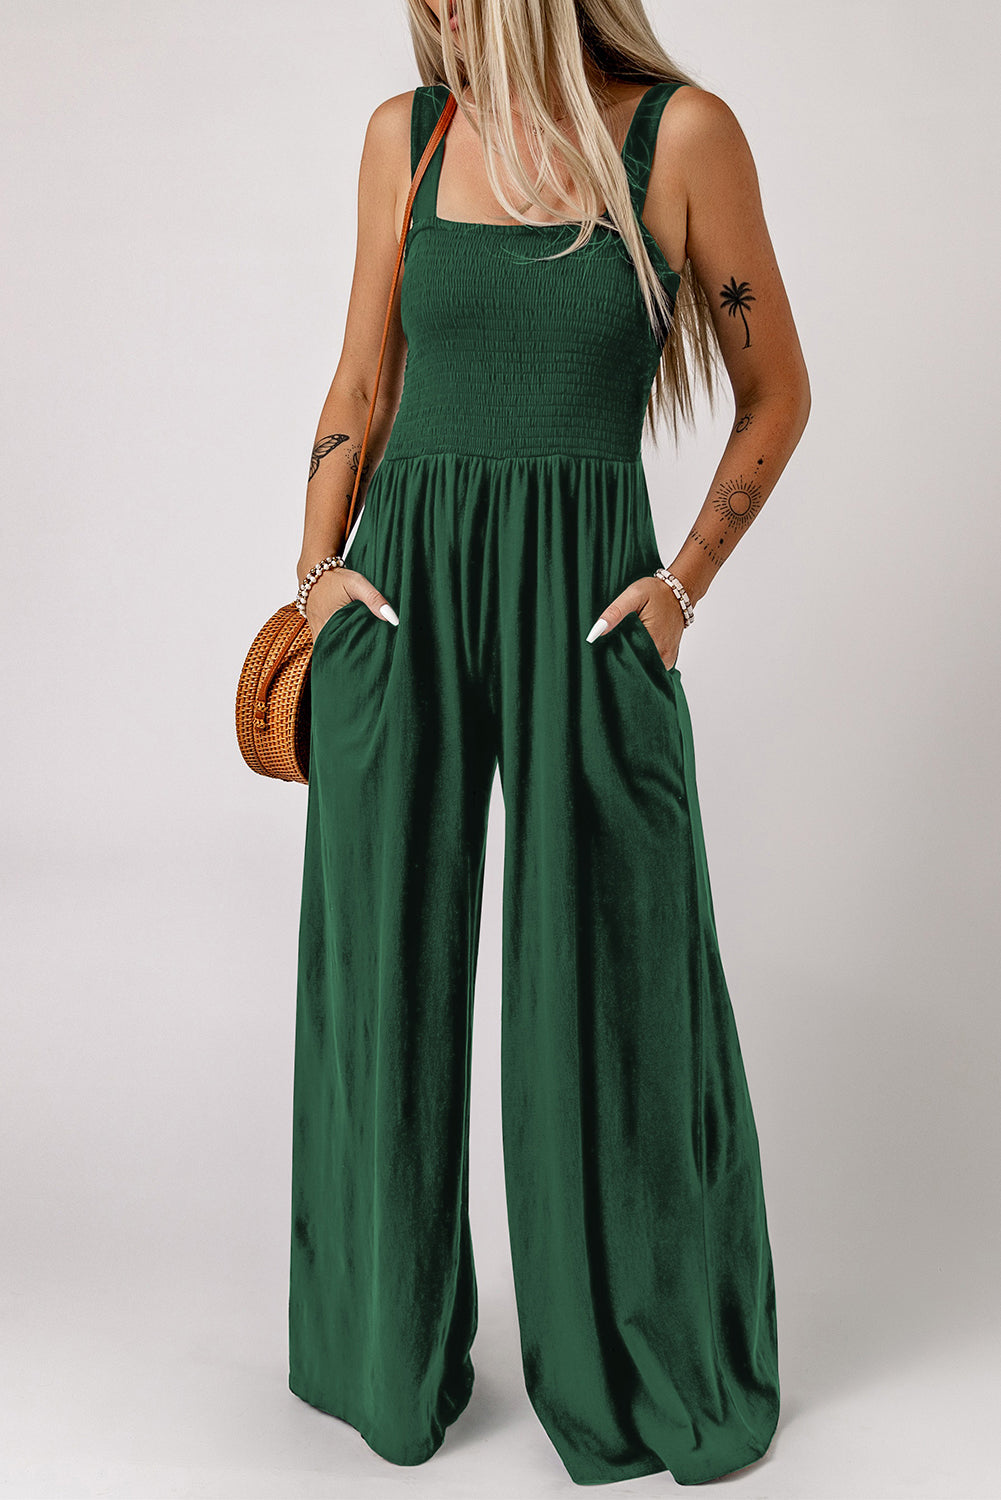 Smocked Square Neck Wide Leg Jumpsuit with Pockets - Shop women apparel, Jewelry, bath & beauty products online - Arwen's Boutique